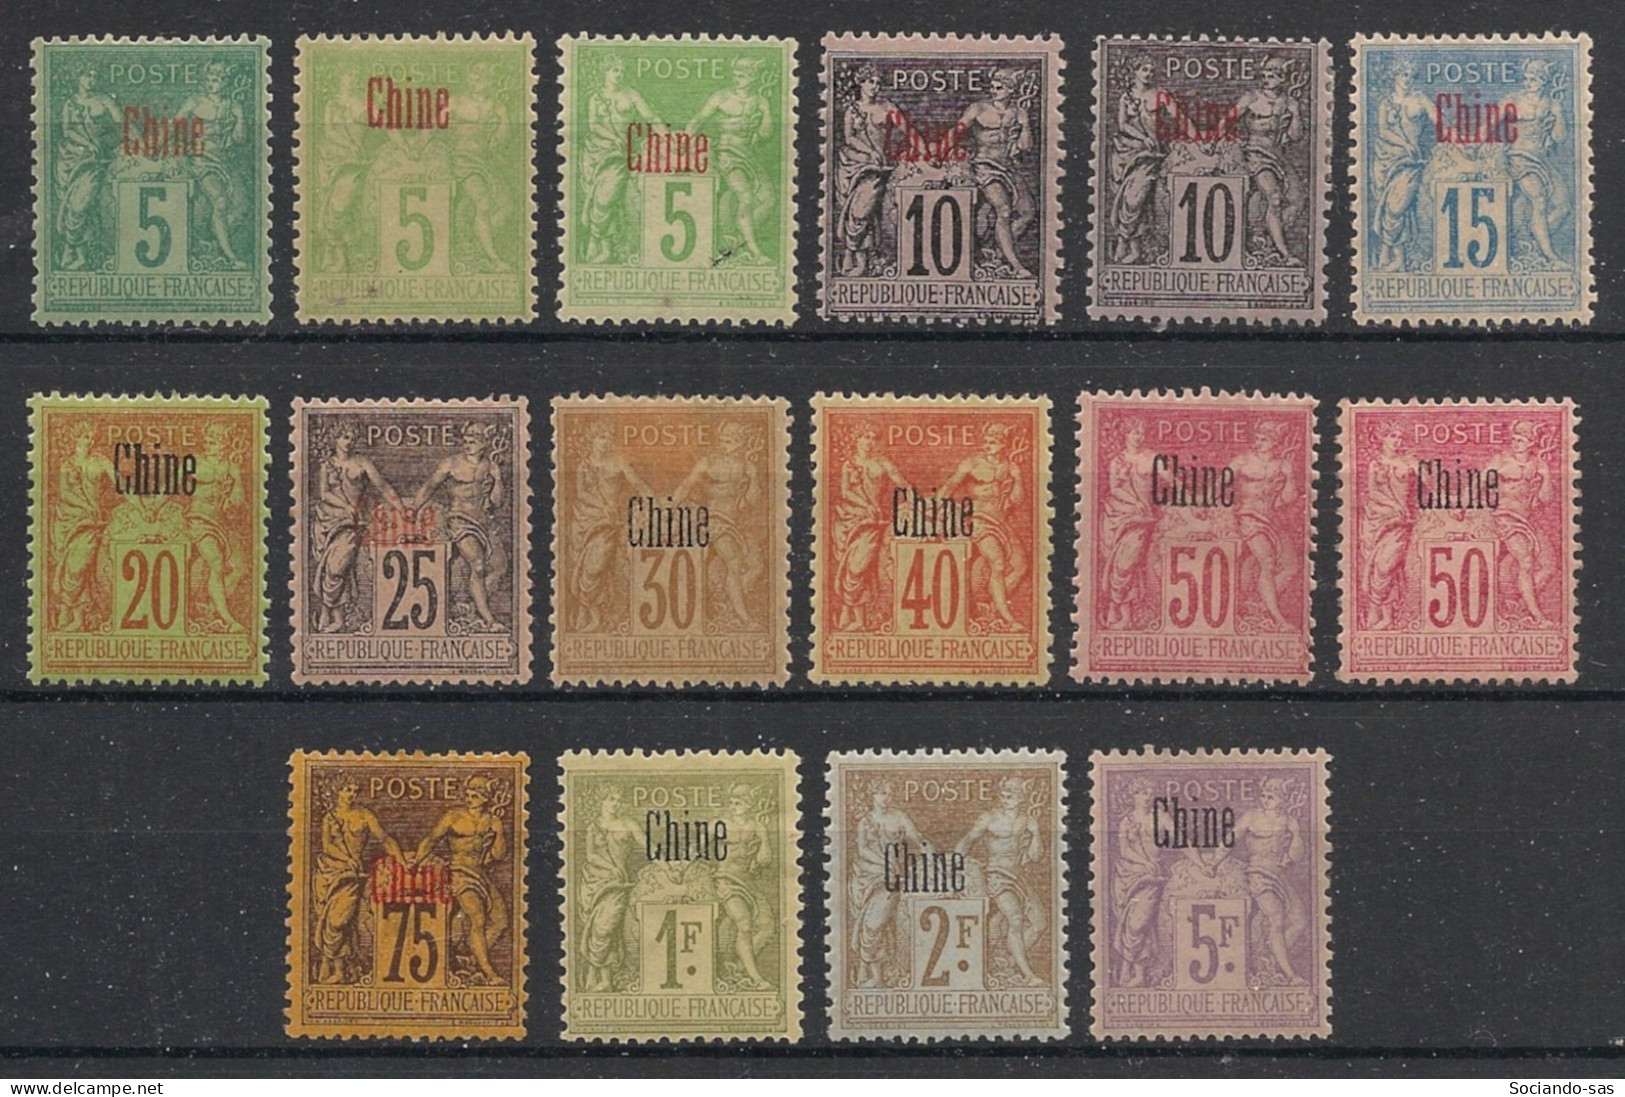 CHINE - 1894-1900 - N°Yv. 1 à 16 - Type Sage - Série Complète - Neuf * / MH VF - Nuovi